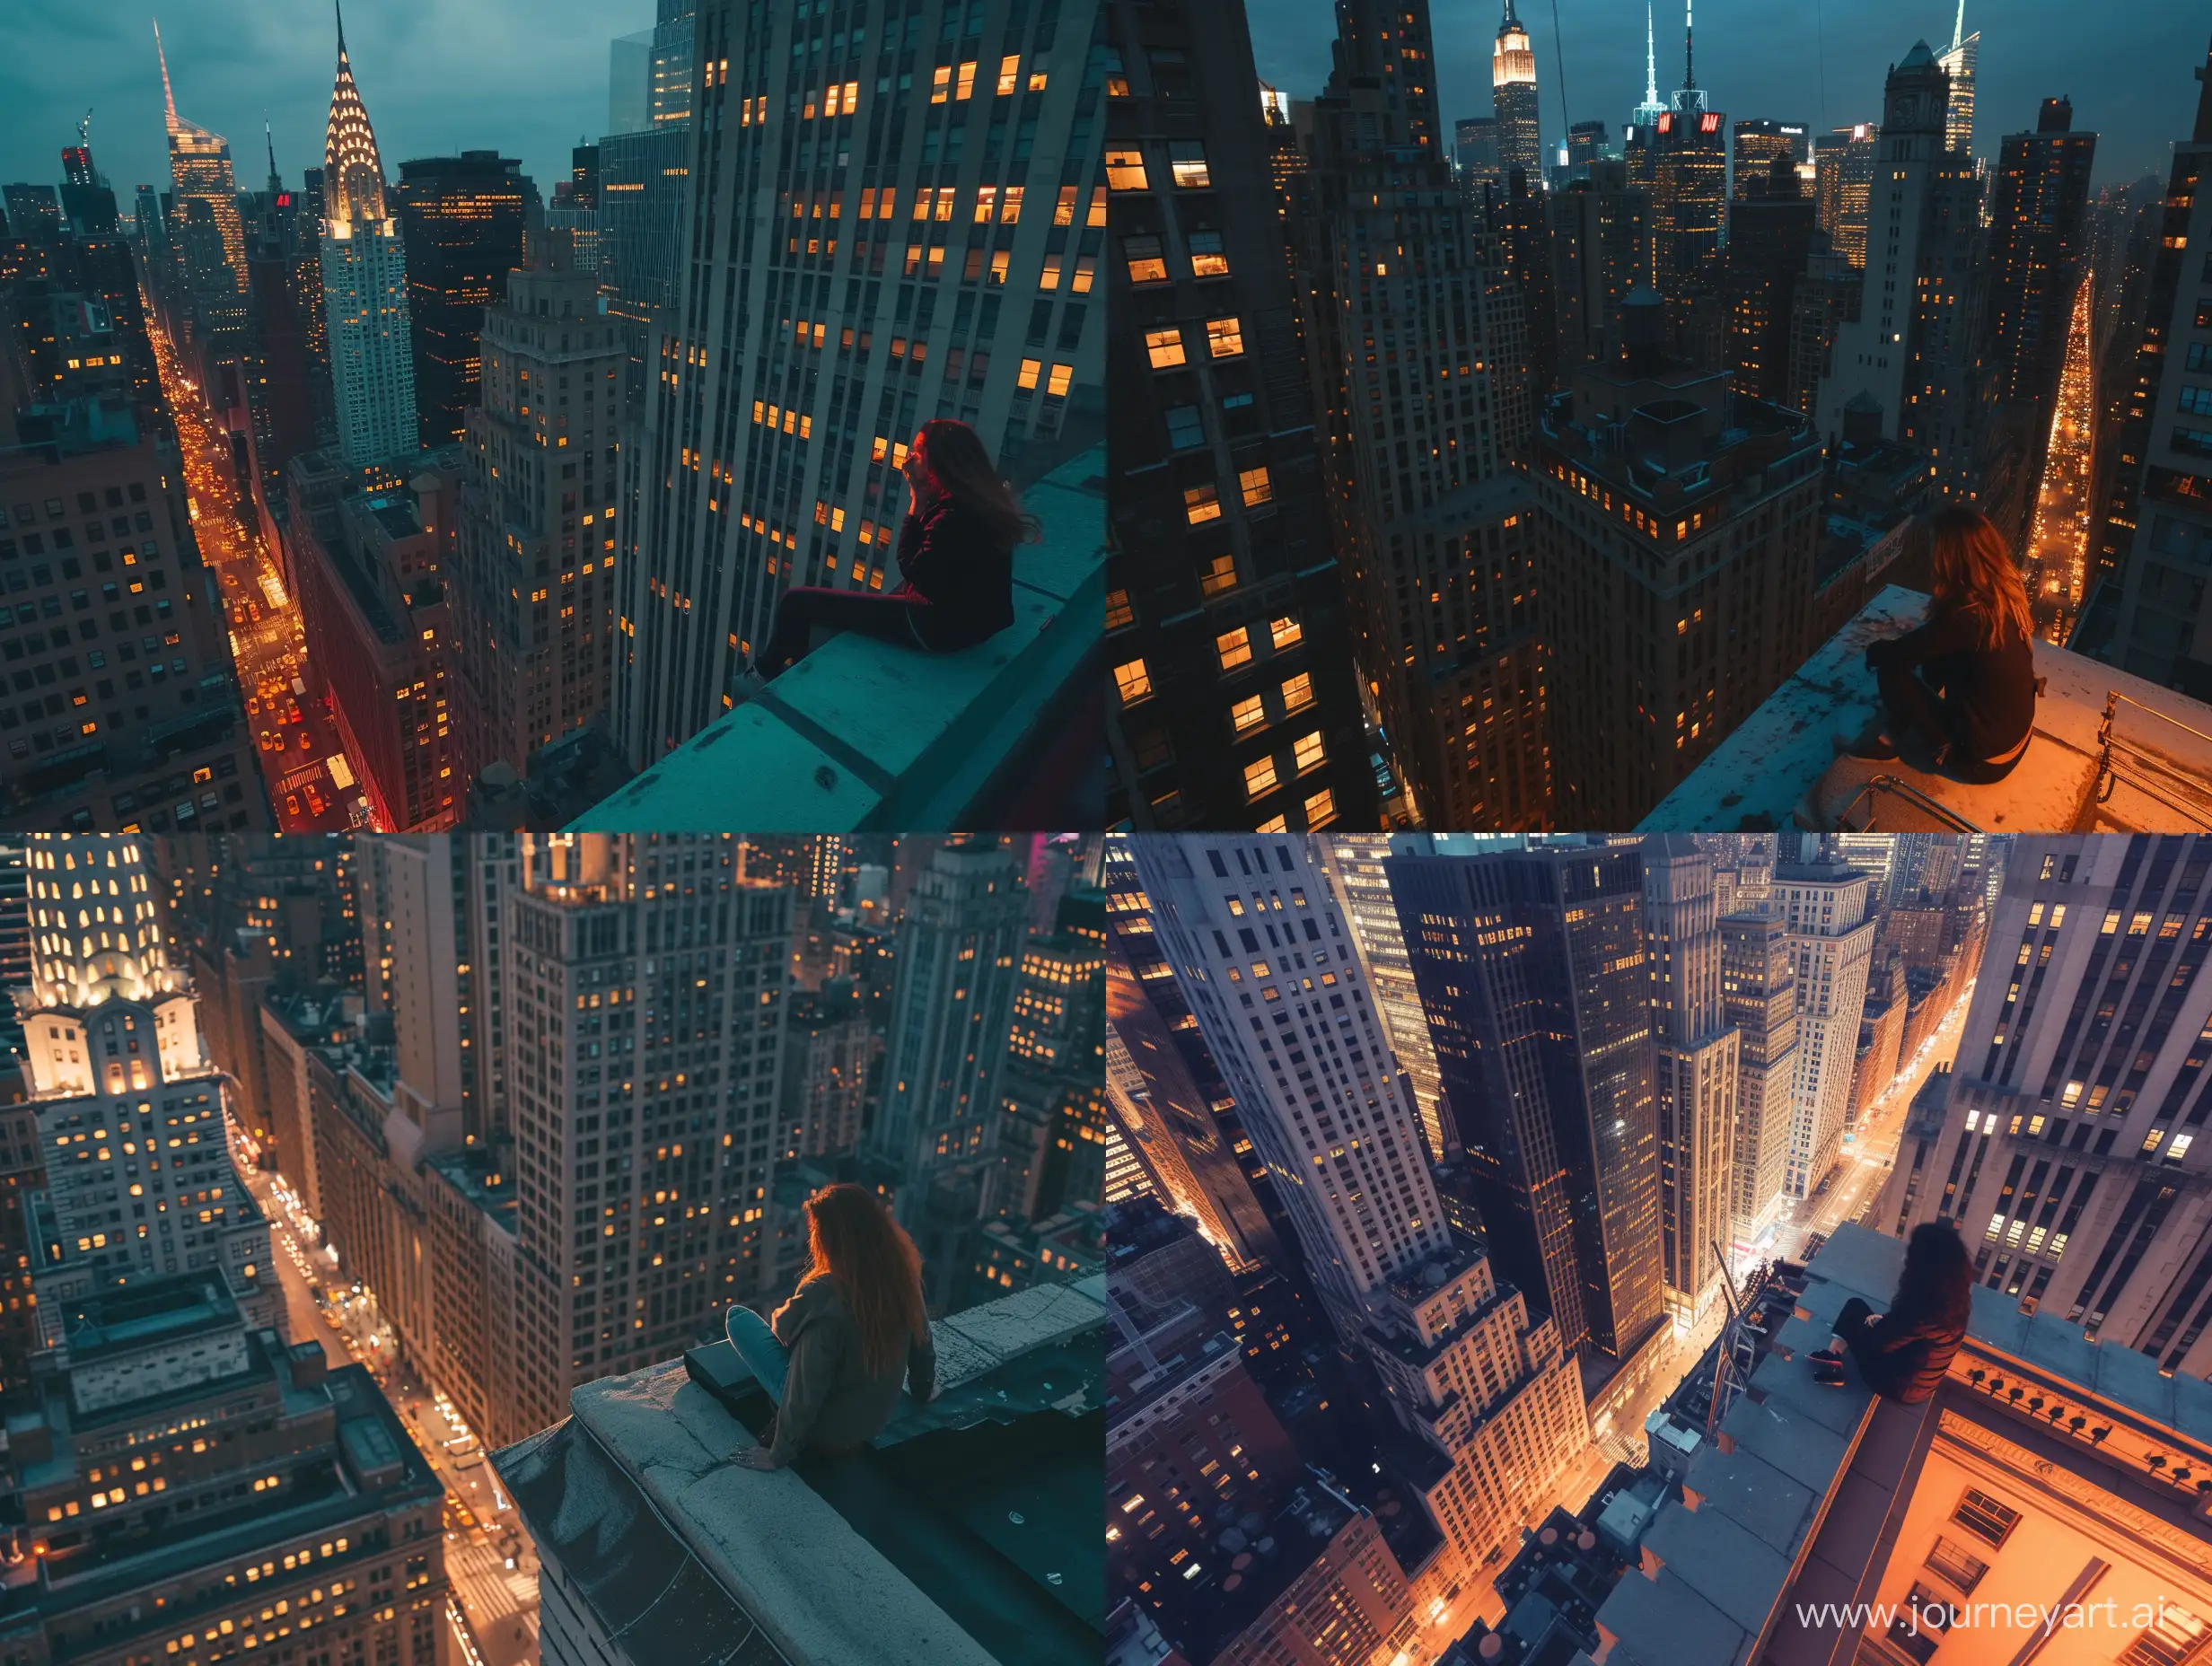 New-York-City-Skyline-at-Night-A-Captivating-Rooftop-View